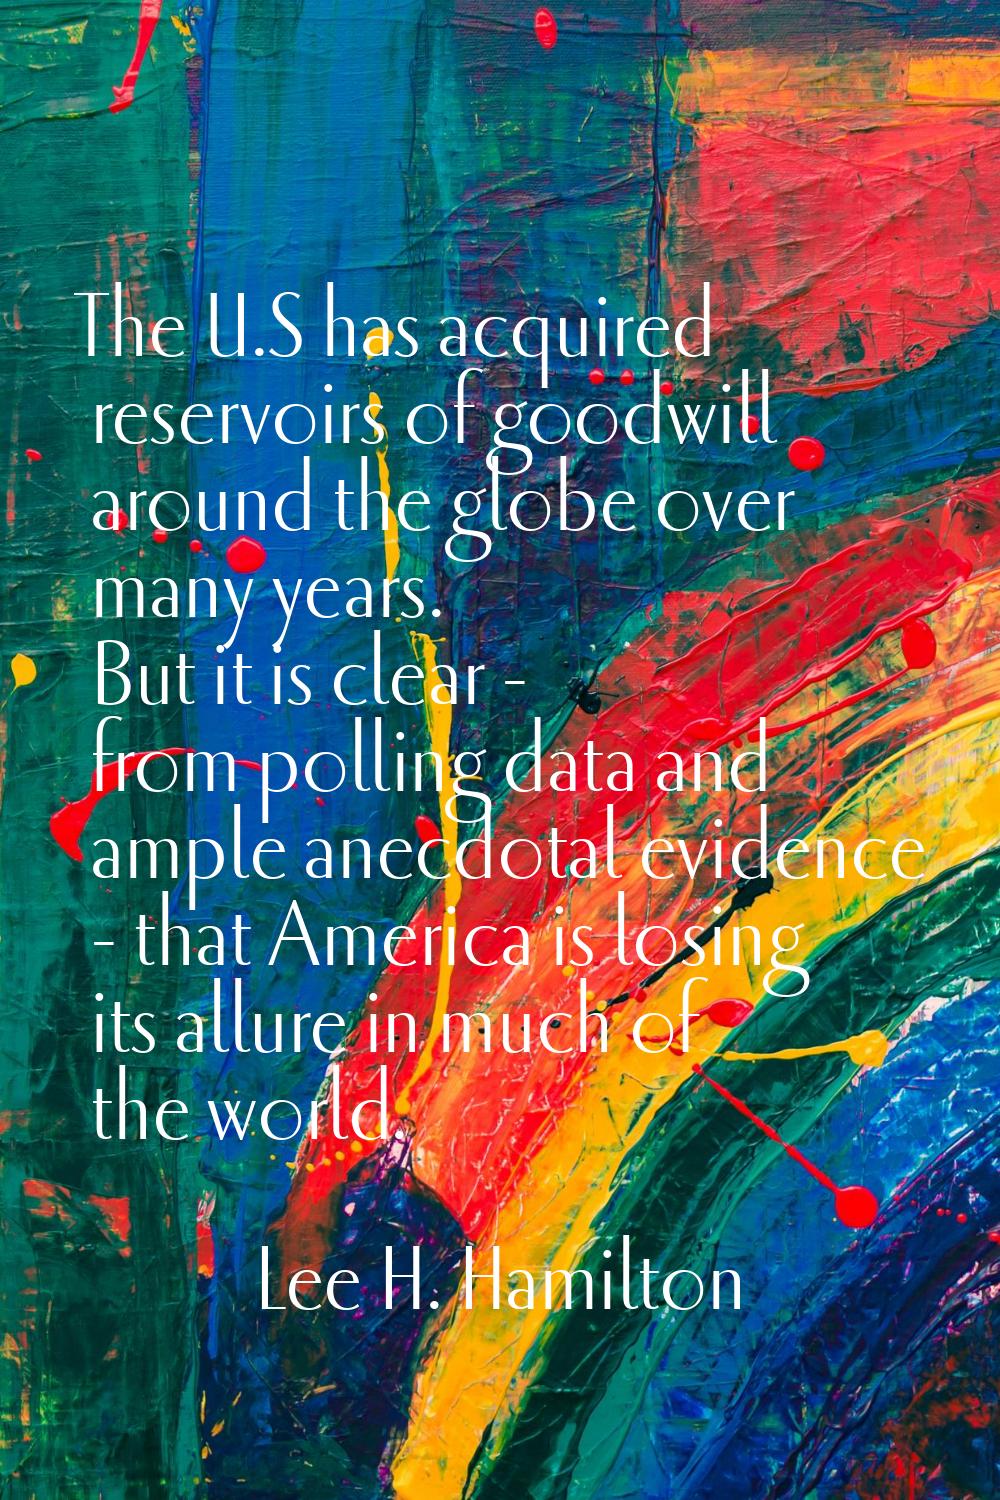 The U.S has acquired reservoirs of goodwill around the globe over many years. But it is clear - fro